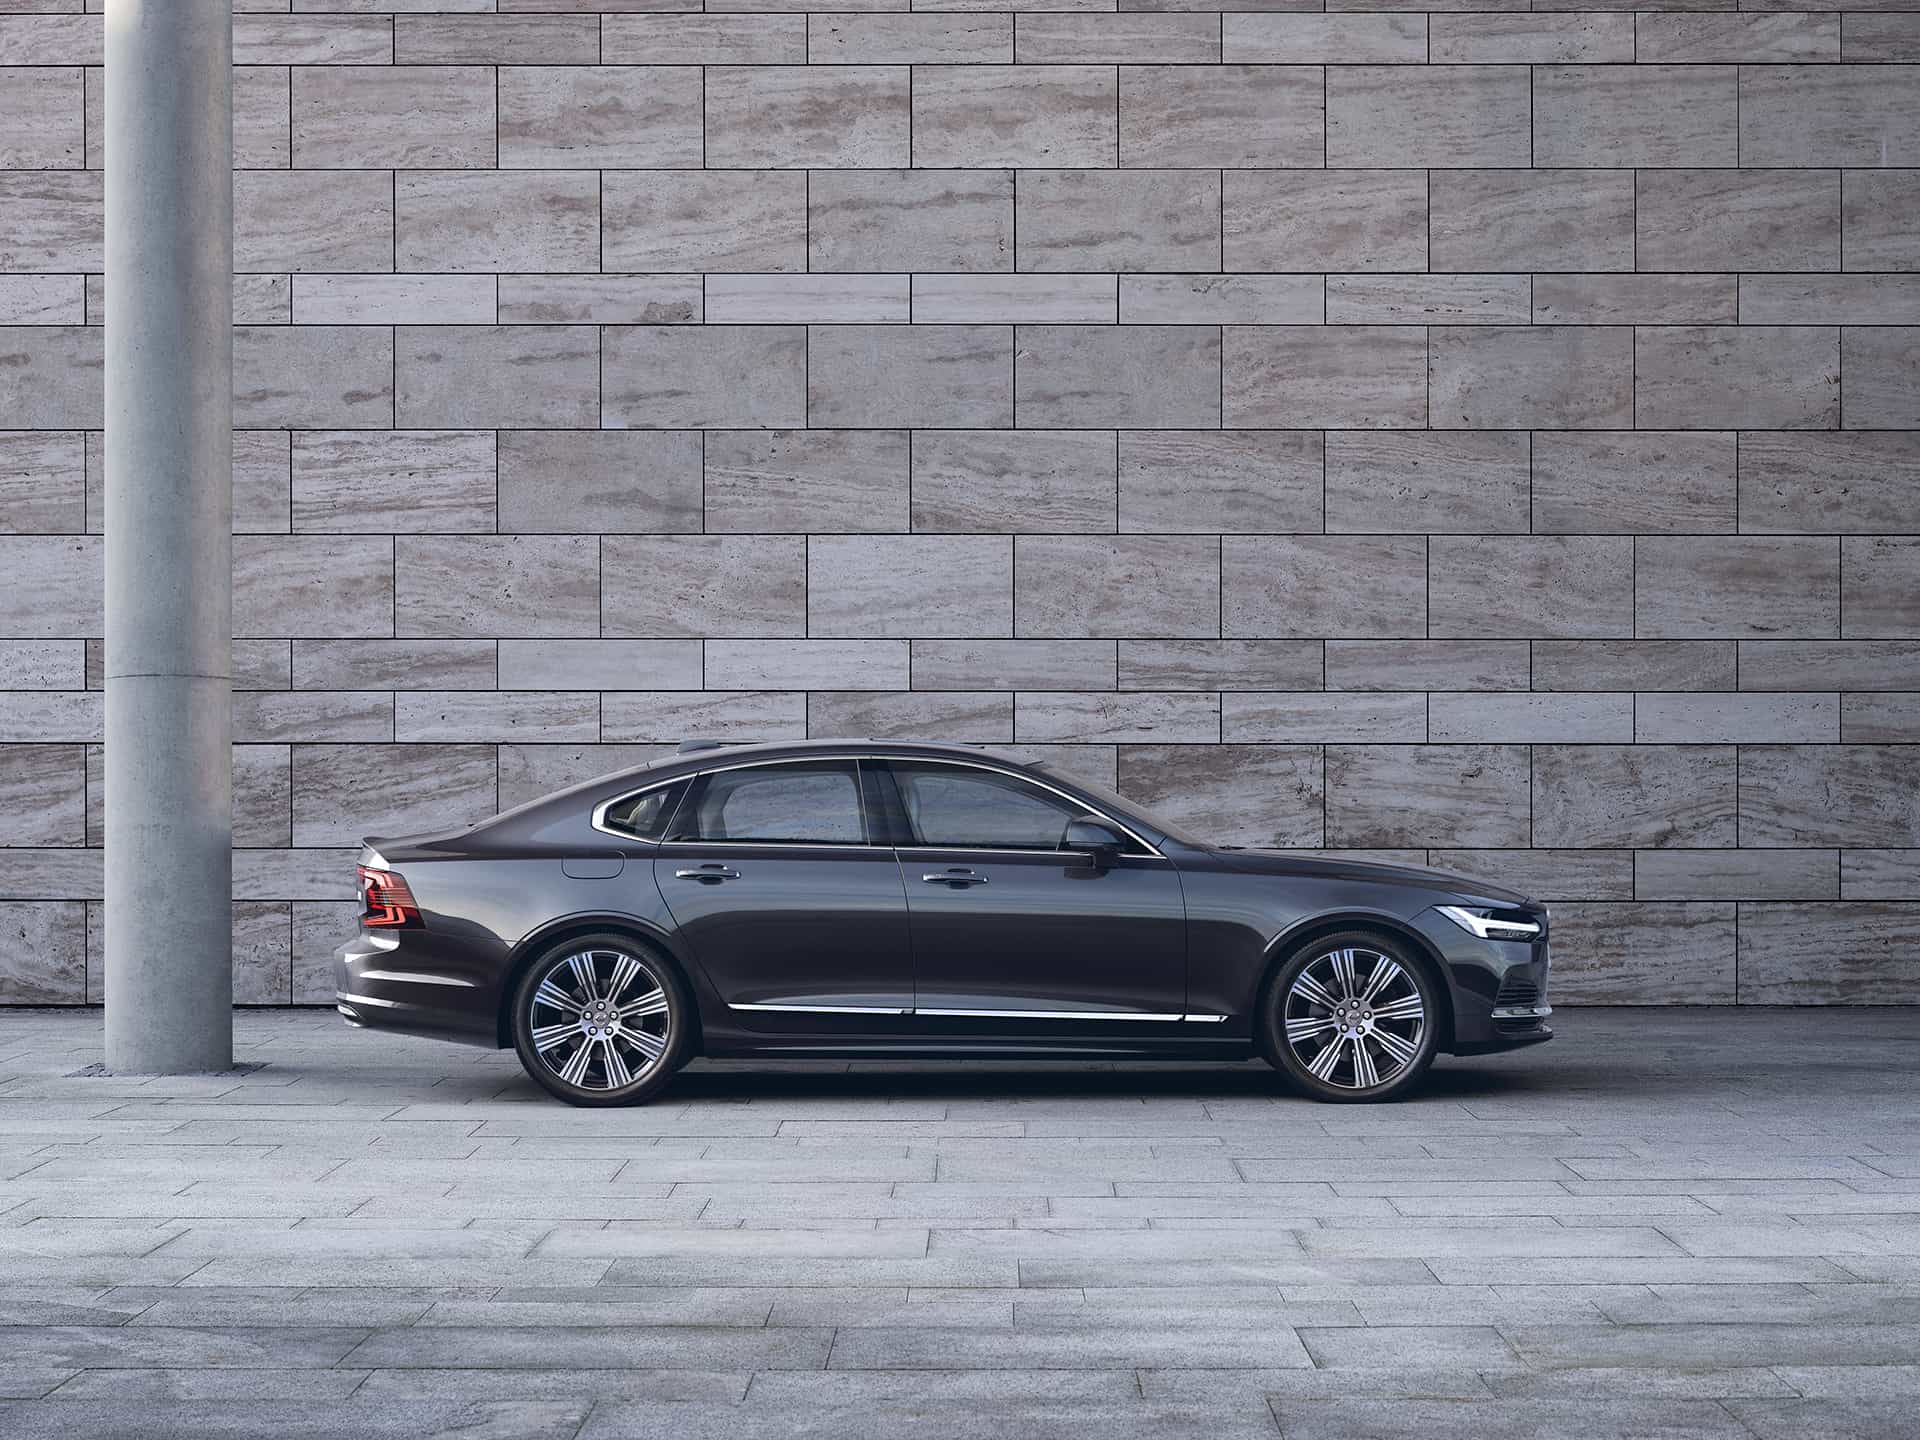 A dark Volvo S90 sedan is parked in front of a grey wall.